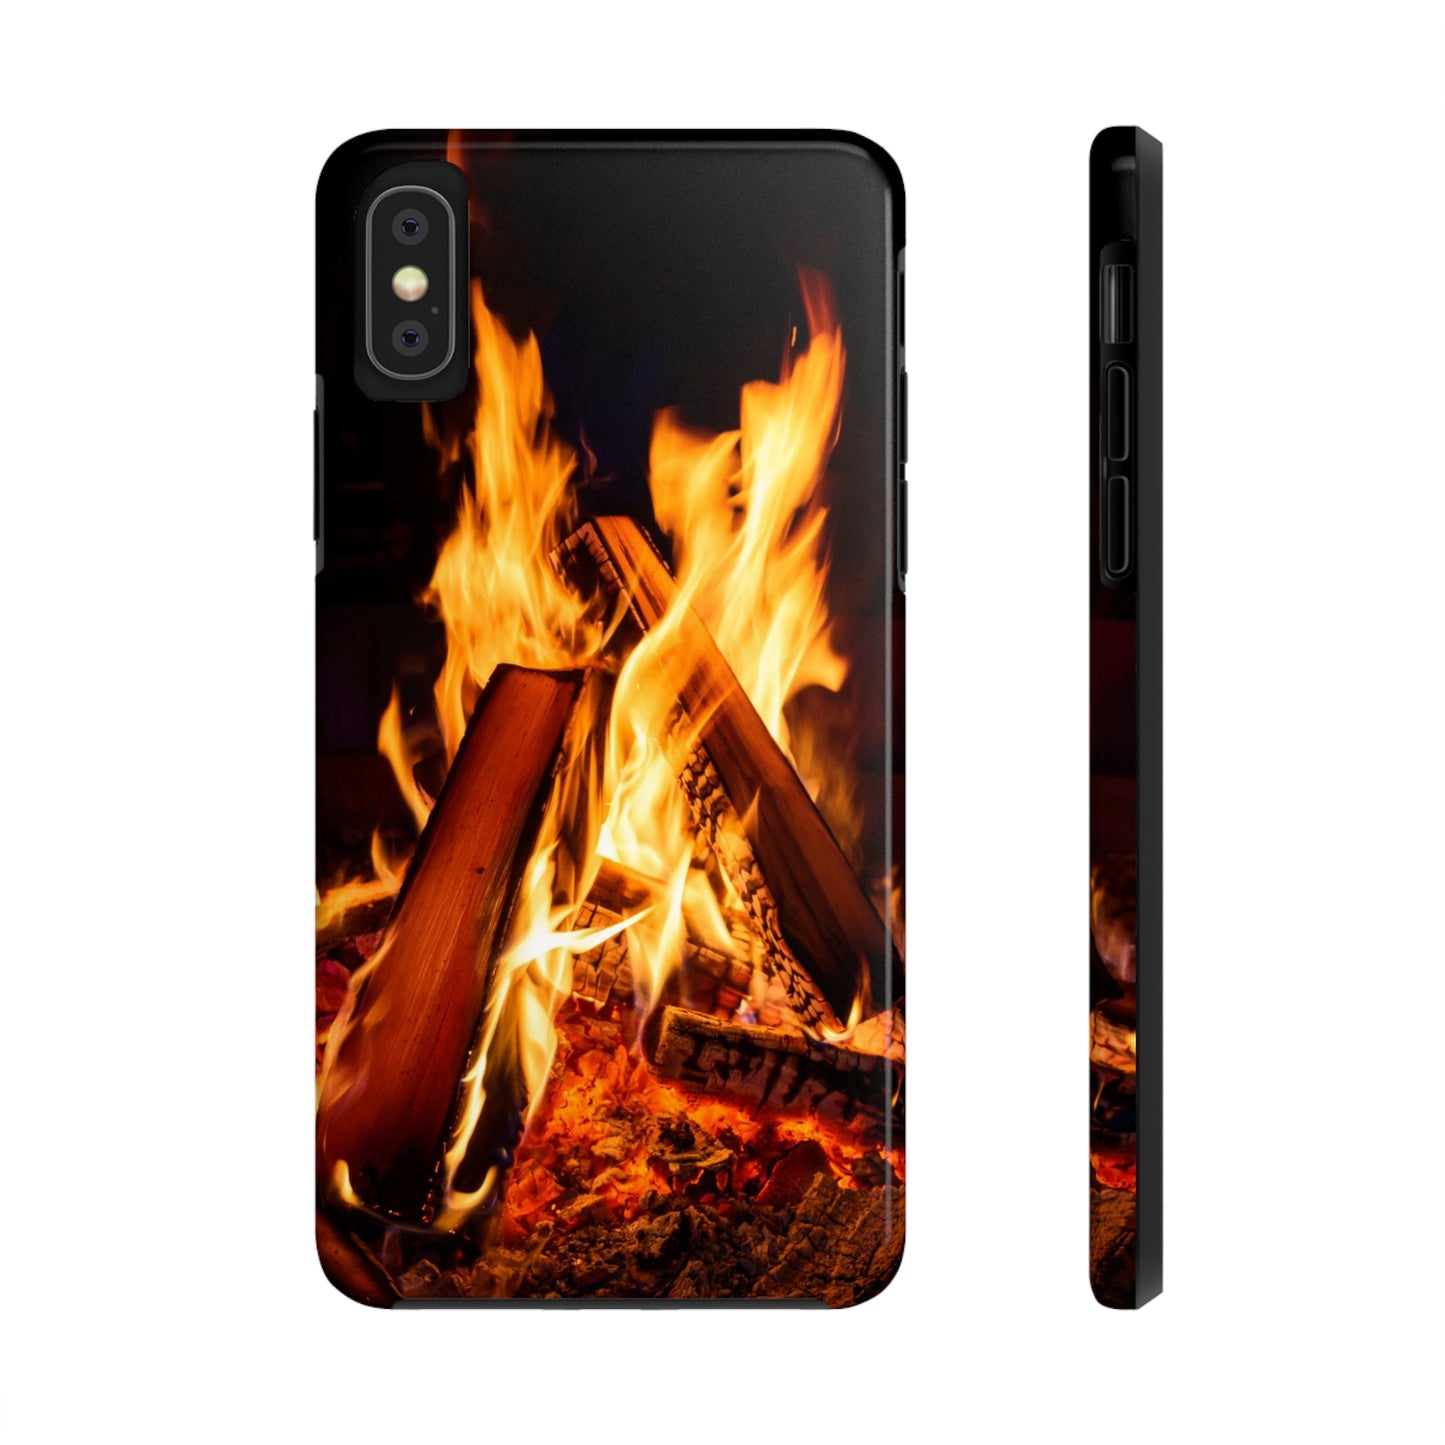 Fire Daze Only / iPhone Case